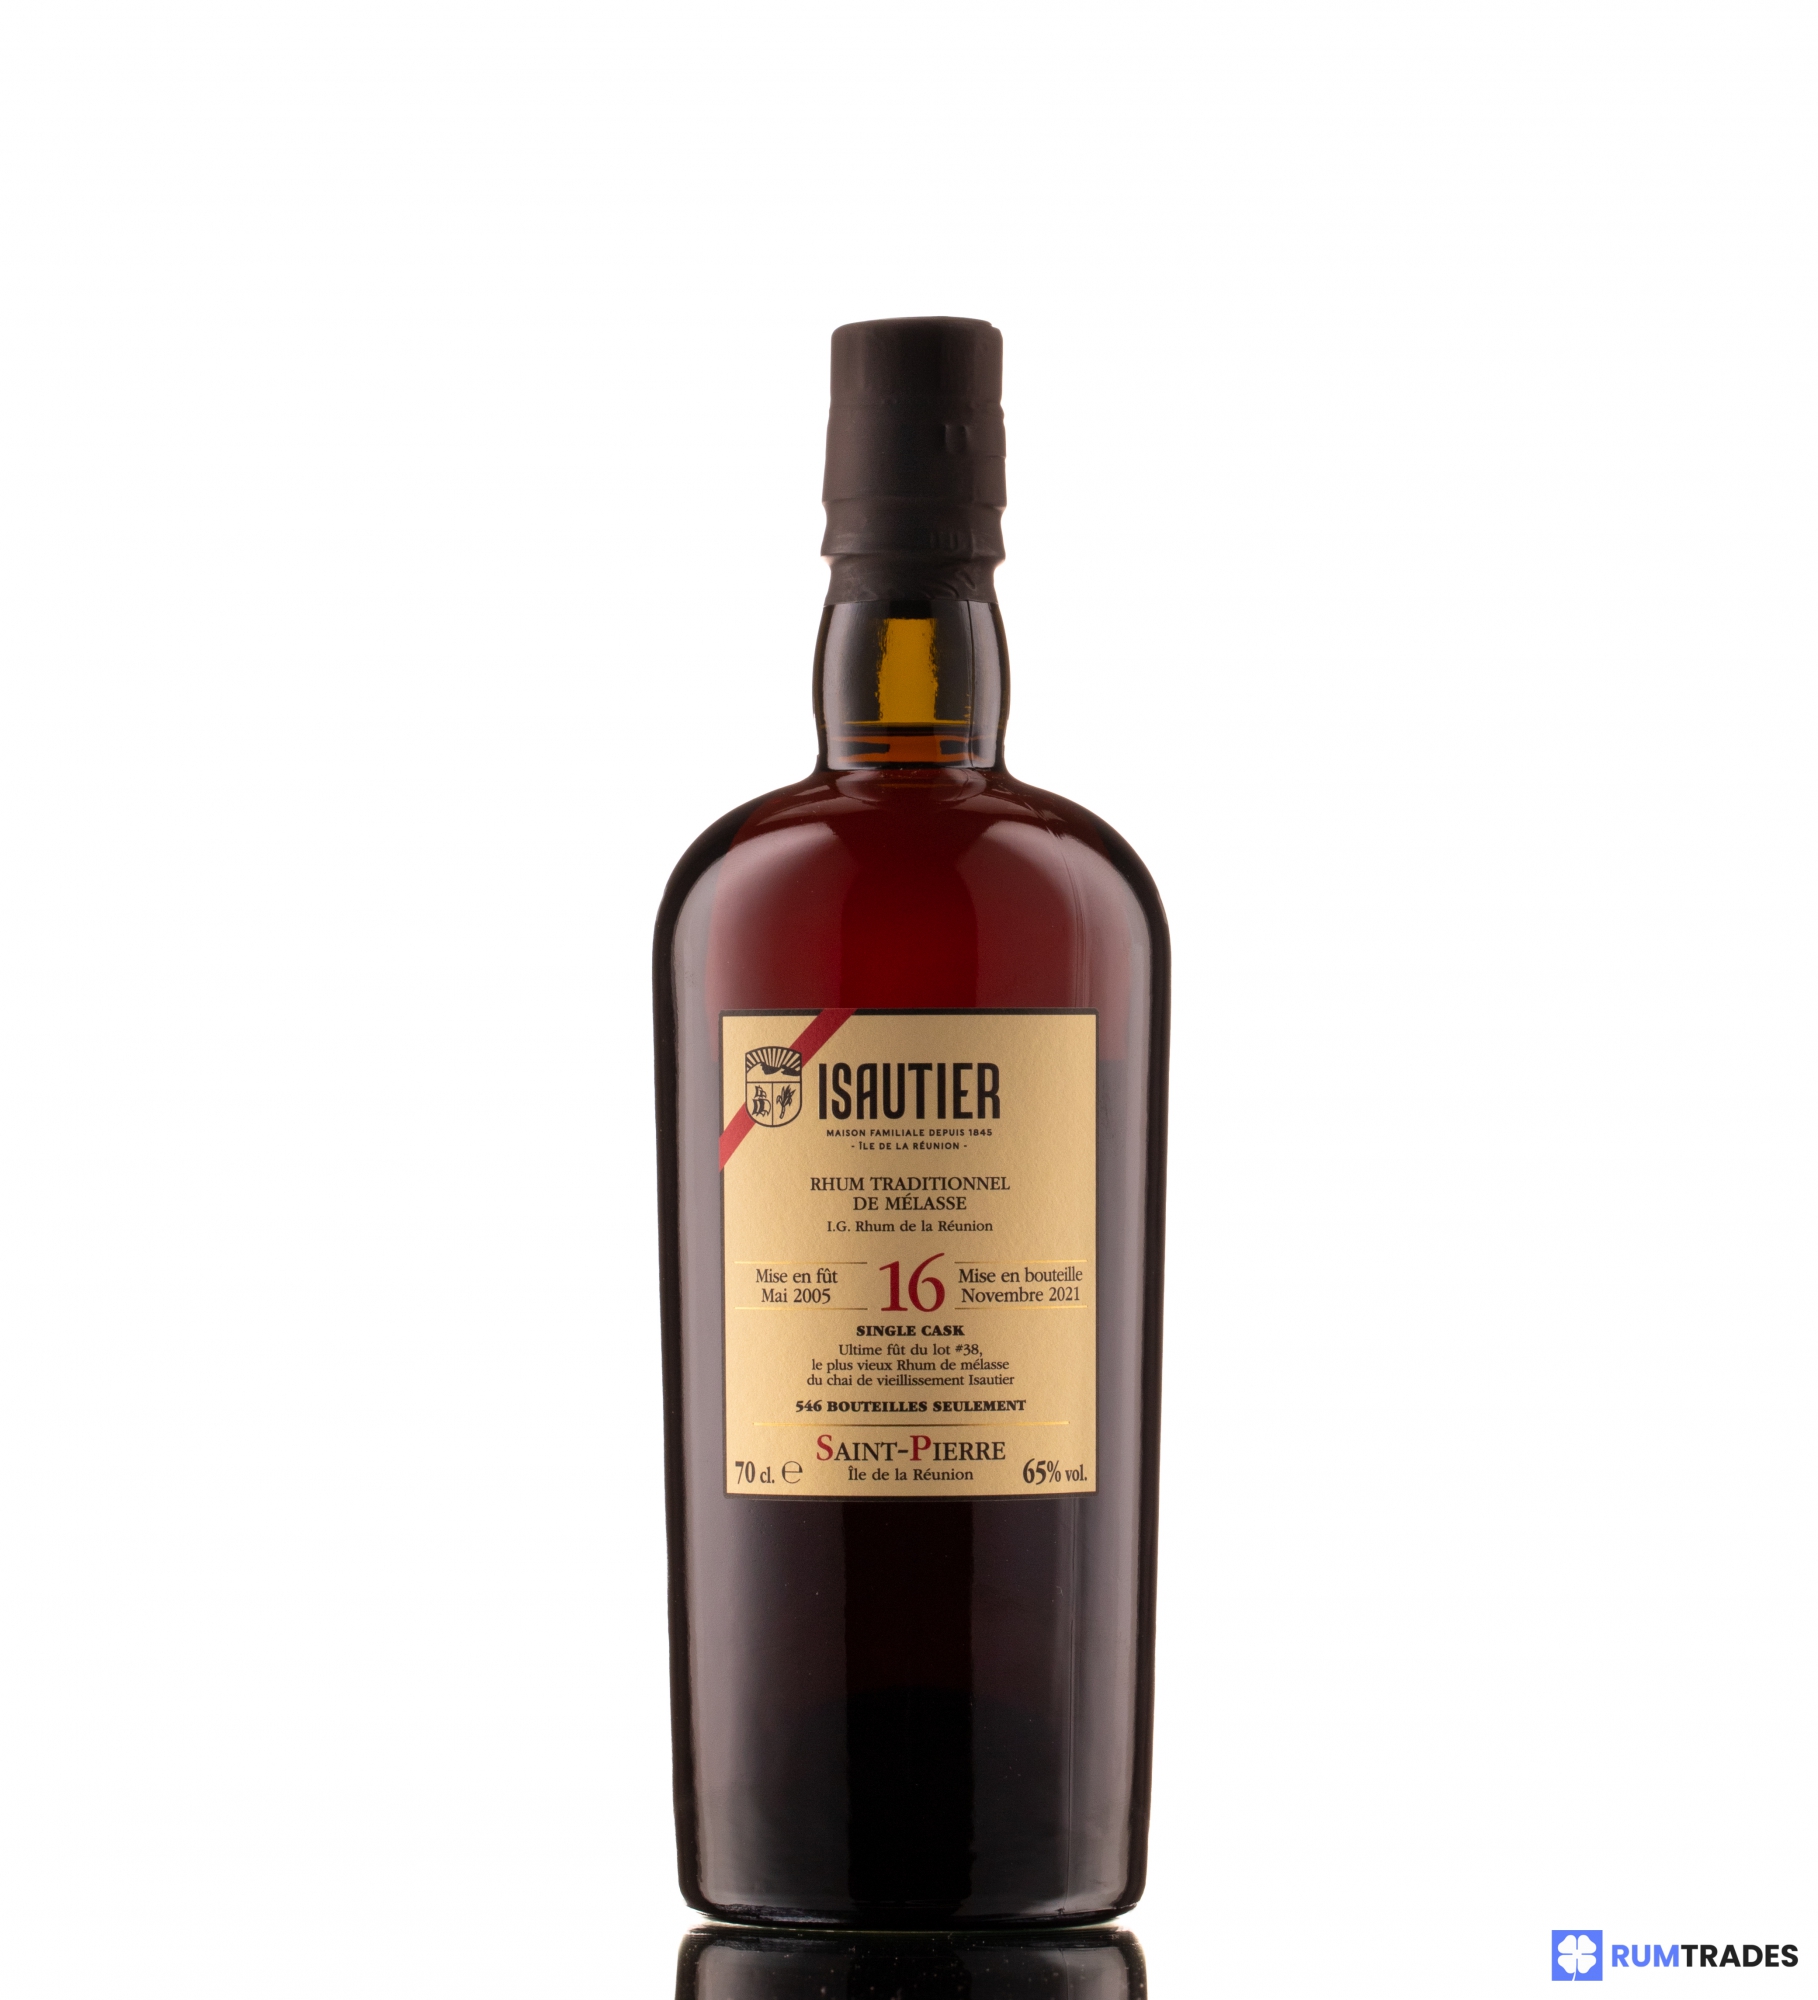 Discover the rums from Reunion Island by Maison Isautier